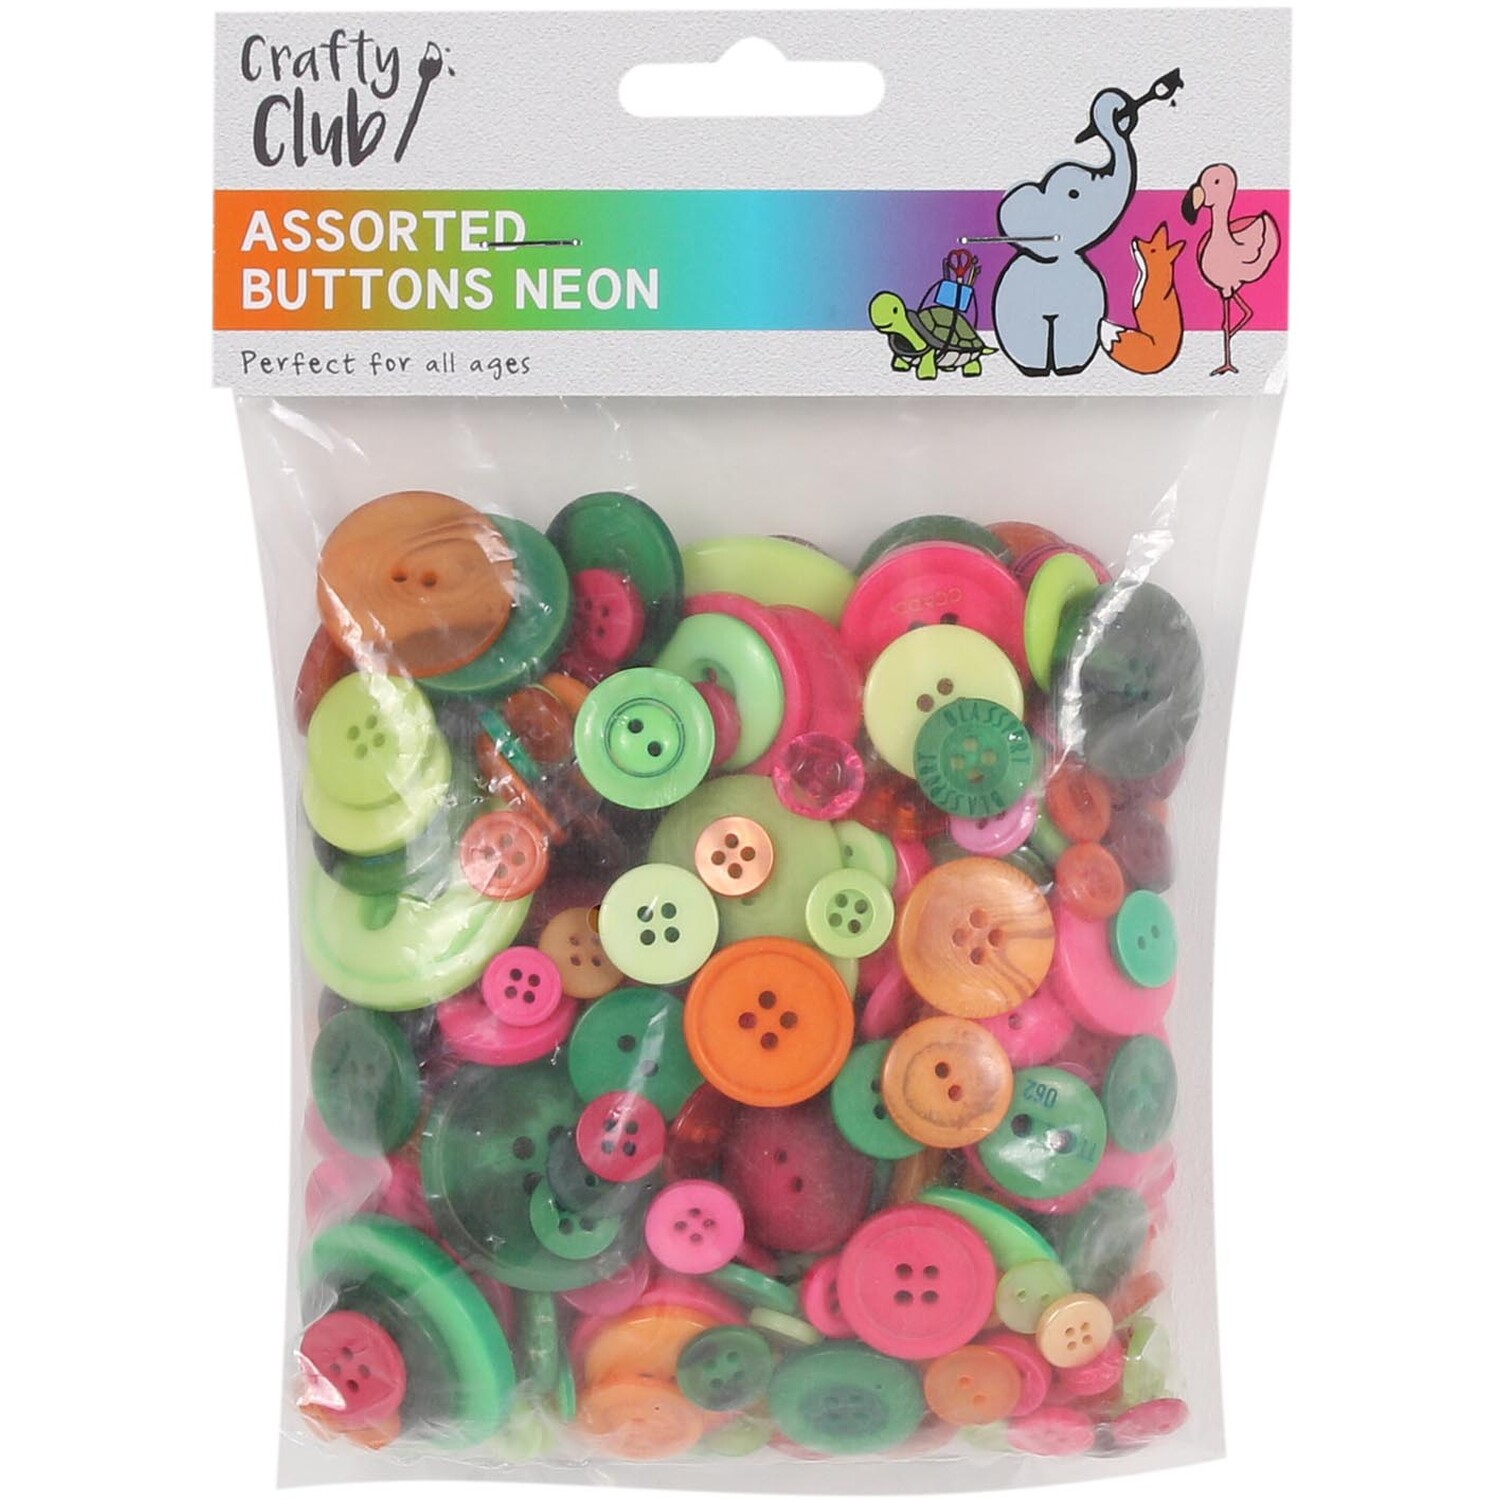 Crafty Club Assorted Buttons - Neon Image